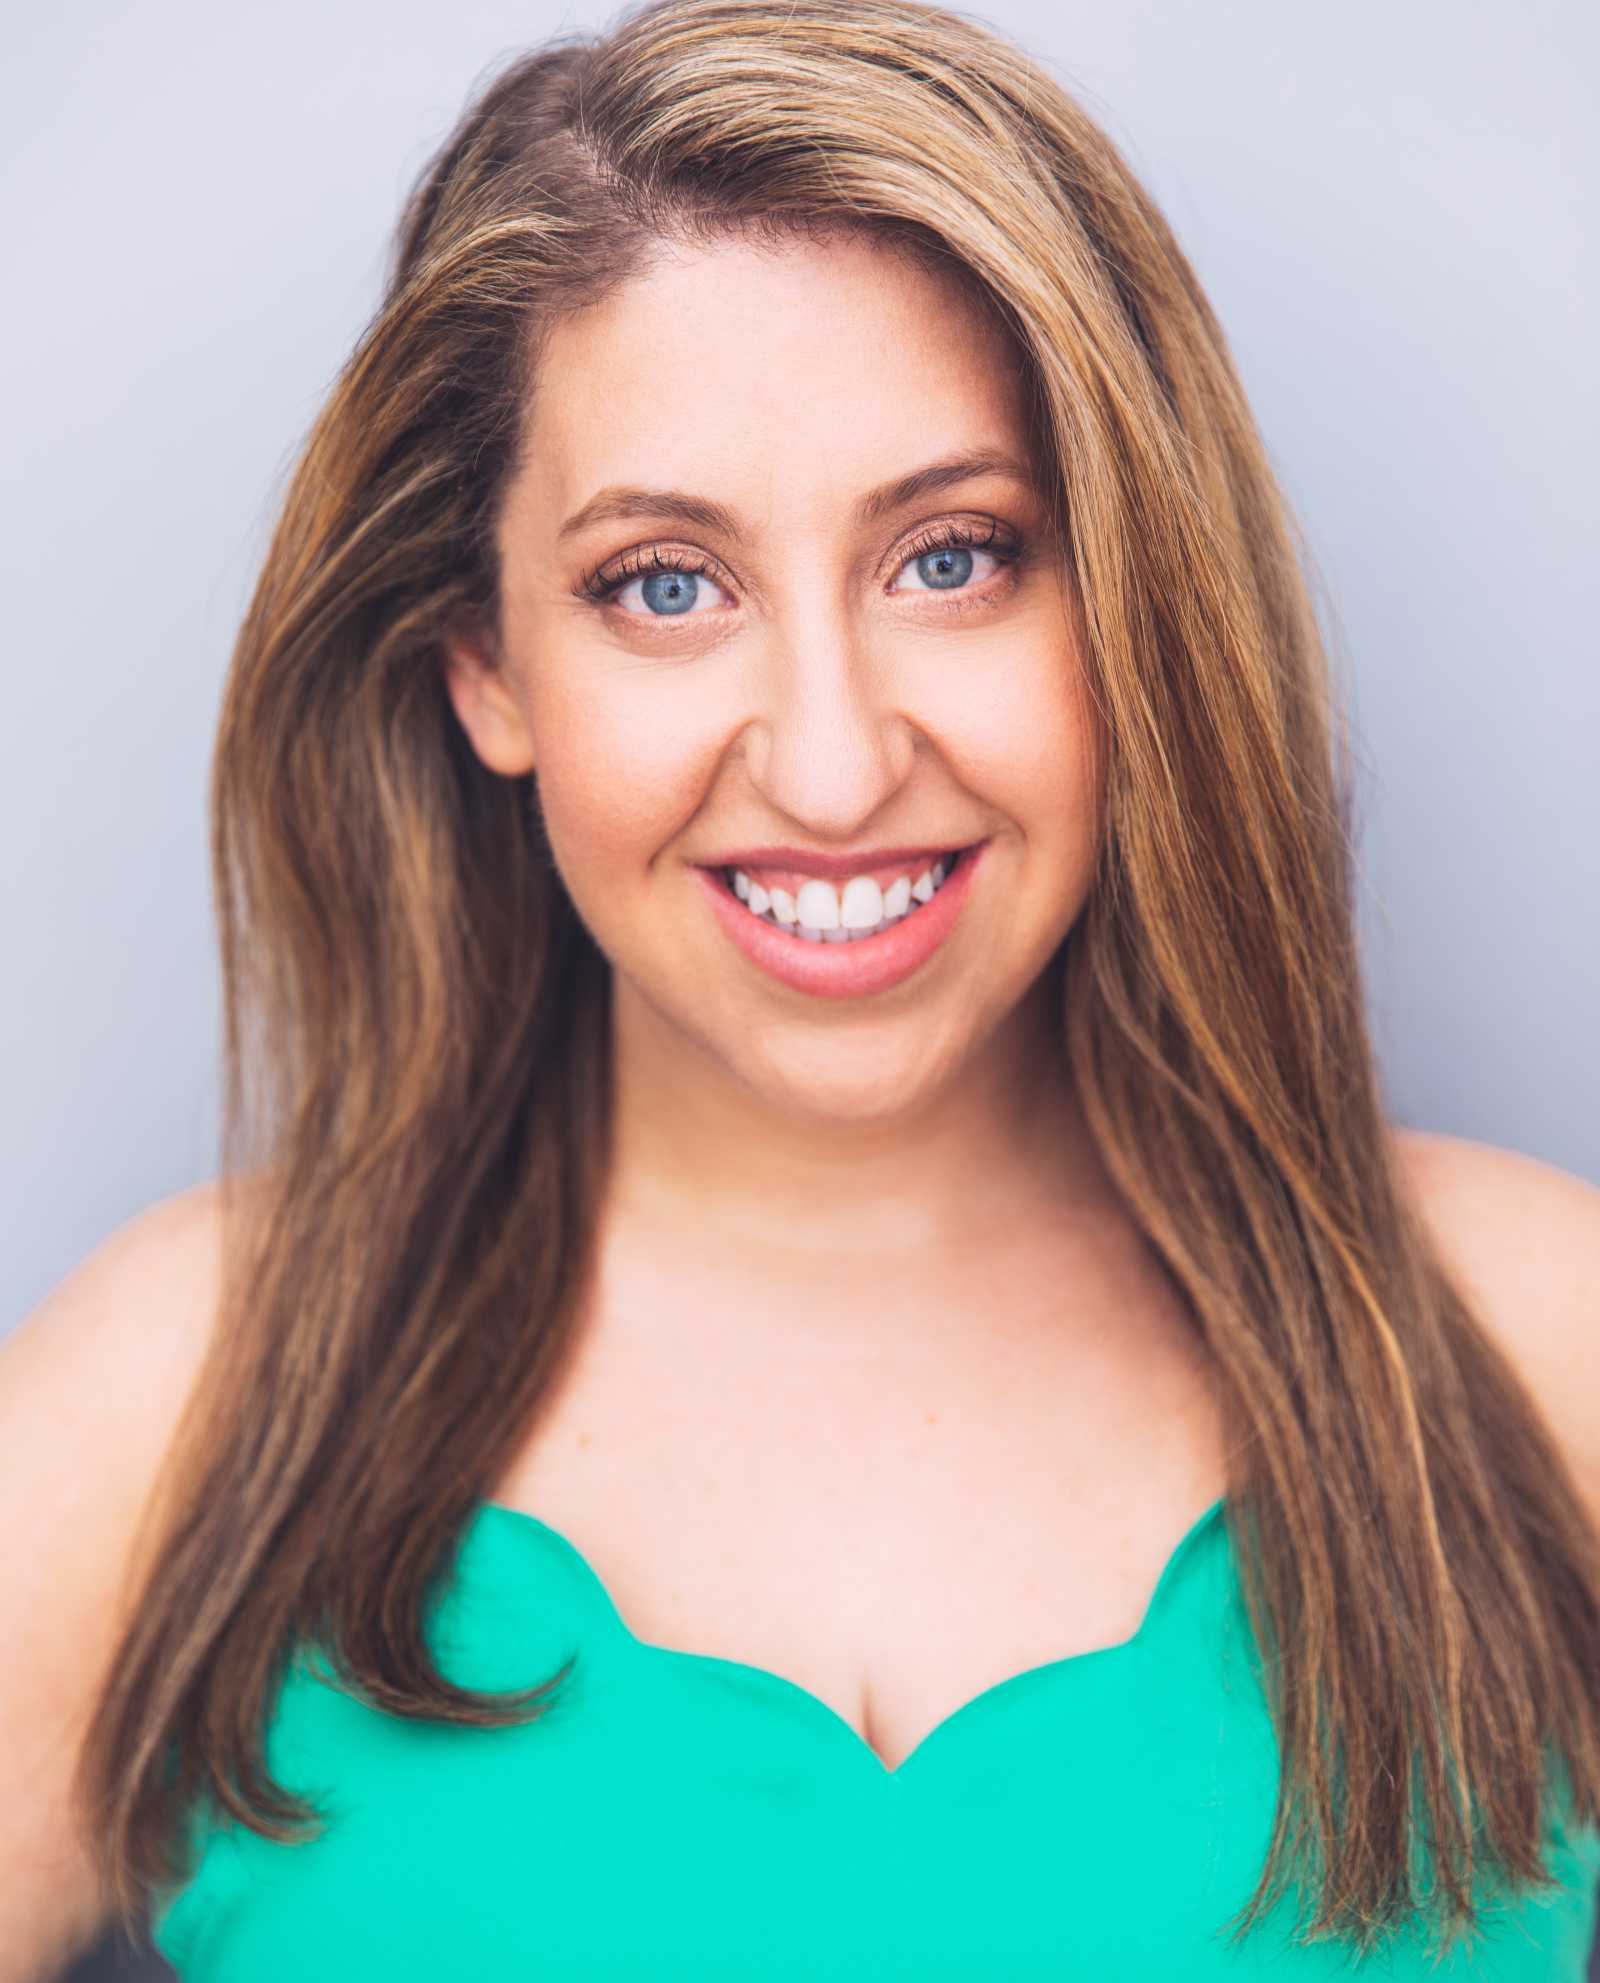 Pam Schuller headshot in bright teal top